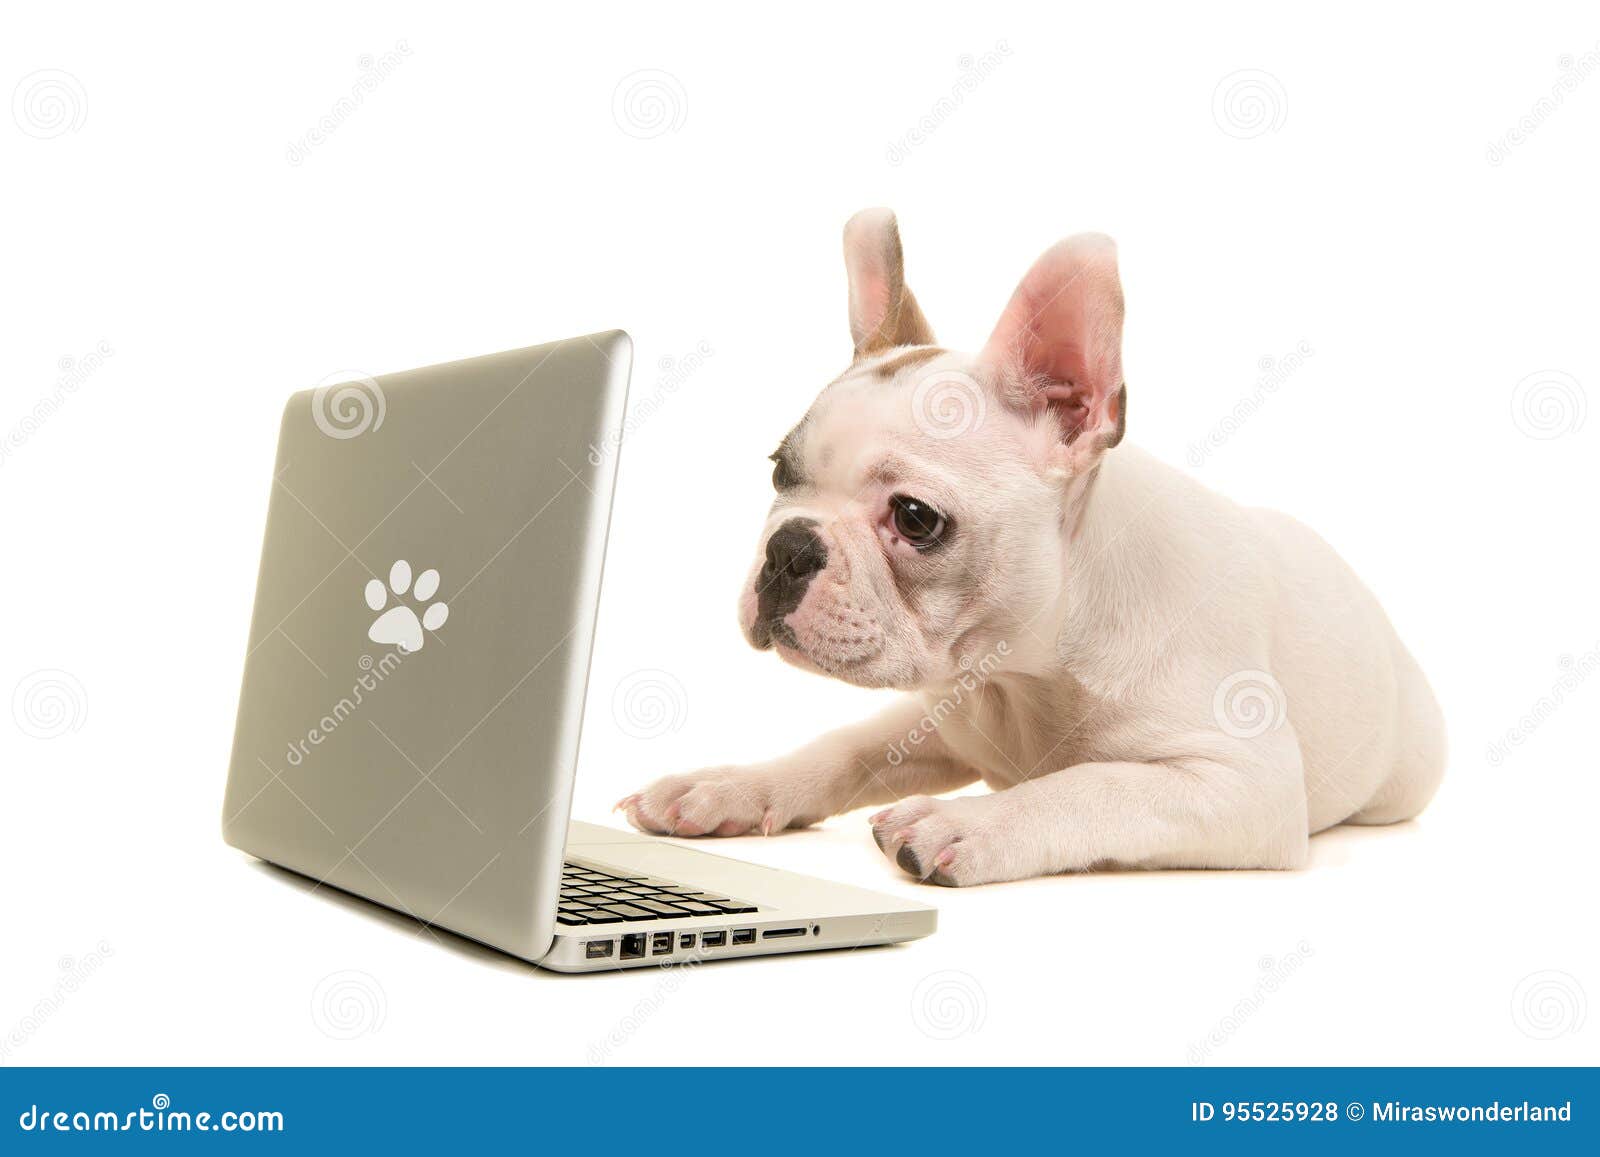 french bulldog puppy lying on the floor looking at a labtop